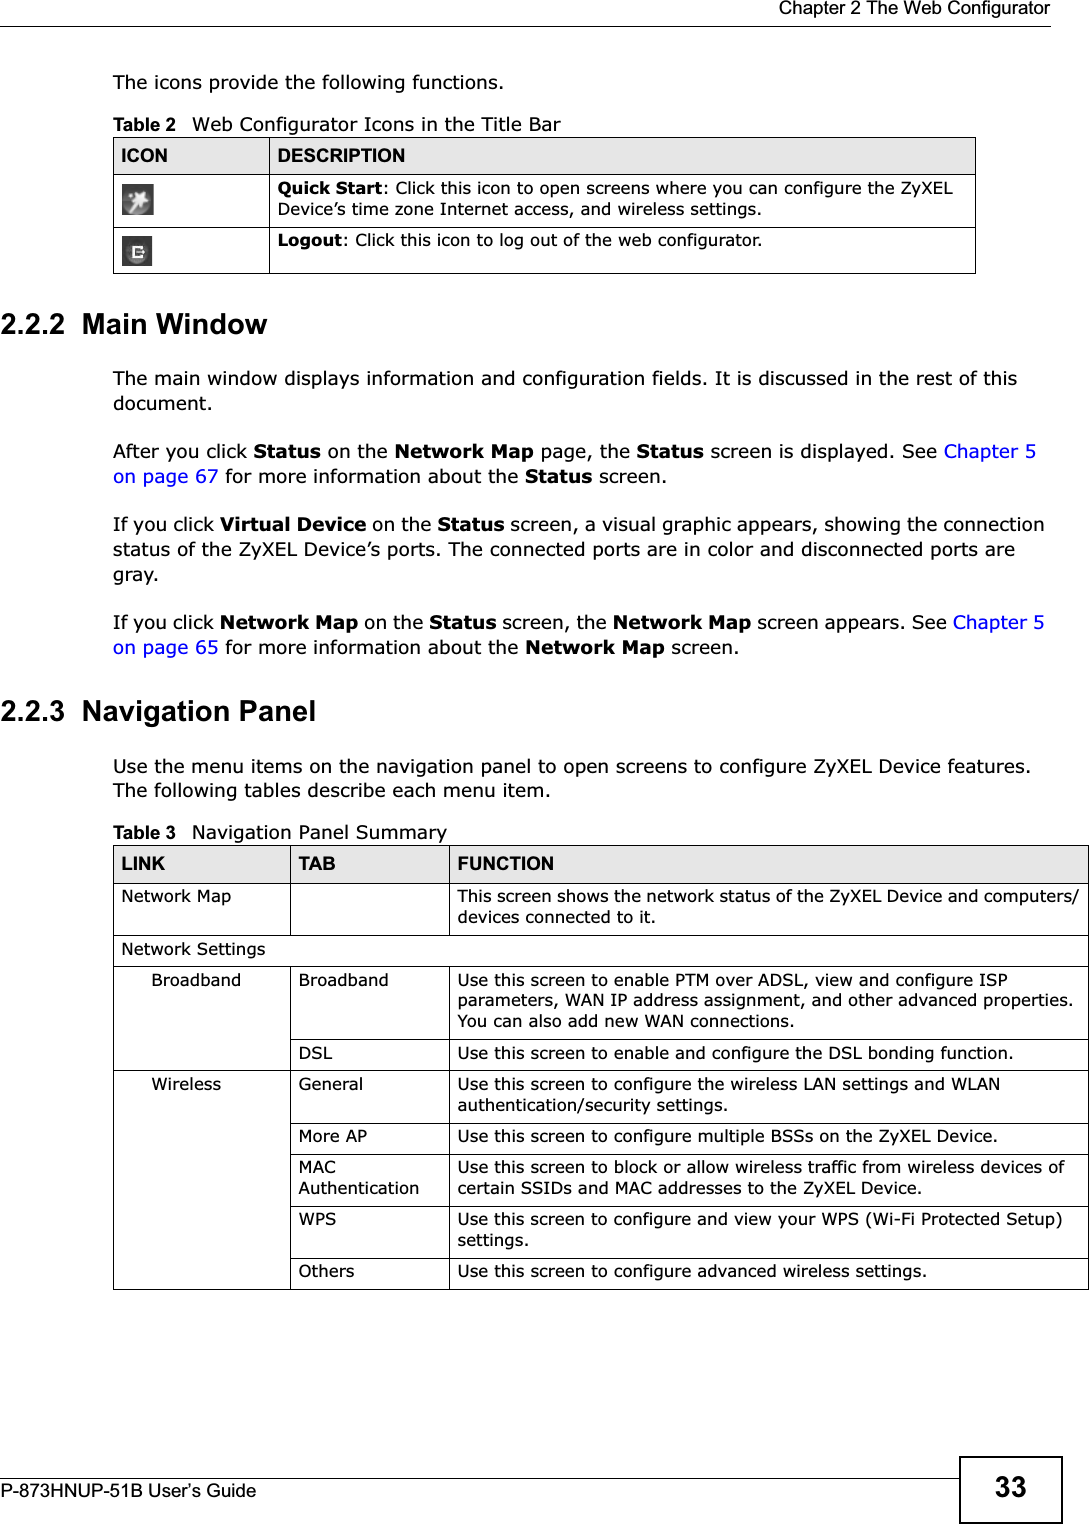  Chapter 2 The Web ConfiguratorP-873HNUP-51B User’s Guide 33The icons provide the following functions.2.2.2  Main WindowThe main window displays information and configuration fields. It is discussed in the rest of this document.After you click Status on the Network Map page, the Status screen is displayed. See Chapter 5 on page 67 for more information about the Status screen.If you click Virtual Device on the Status screen, a visual graphic appears, showing the connection status of the ZyXEL Device’s ports. The connected ports are in color and disconnected ports are gray.If you click Network Map on the Status screen, the Network Map screen appears. See Chapter 5 on page 65 for more information about the Network Map screen.2.2.3  Navigation PanelUse the menu items on the navigation panel to open screens to configure ZyXEL Device features. The following tables describe each menu item.       Table 2   Web Configurator Icons in the Title BarICON DESCRIPTIONQuick Start: Click this icon to open screens where you can configure the ZyXEL Device’s time zone Internet access, and wireless settings.Logout: Click this icon to log out of the web configurator.Table 3   Navigation Panel SummaryLINK TAB FUNCTIONNetwork Map This screen shows the network status of the ZyXEL Device and computers/devices connected to it.Network SettingsBroadband Broadband Use this screen to enable PTM over ADSL, view and configure ISP parameters, WAN IP address assignment, and other advanced properties. You can also add new WAN connections. DSL Use this screen to enable and configure the DSL bonding function.Wireless General Use this screen to configure the wireless LAN settings and WLAN authentication/security settings. More AP Use this screen to configure multiple BSSs on the ZyXEL Device.MAC AuthenticationUse this screen to block or allow wireless traffic from wireless devices of certain SSIDs and MAC addresses to the ZyXEL Device.WPS Use this screen to configure and view your WPS (Wi-Fi Protected Setup) settings.Others Use this screen to configure advanced wireless settings.